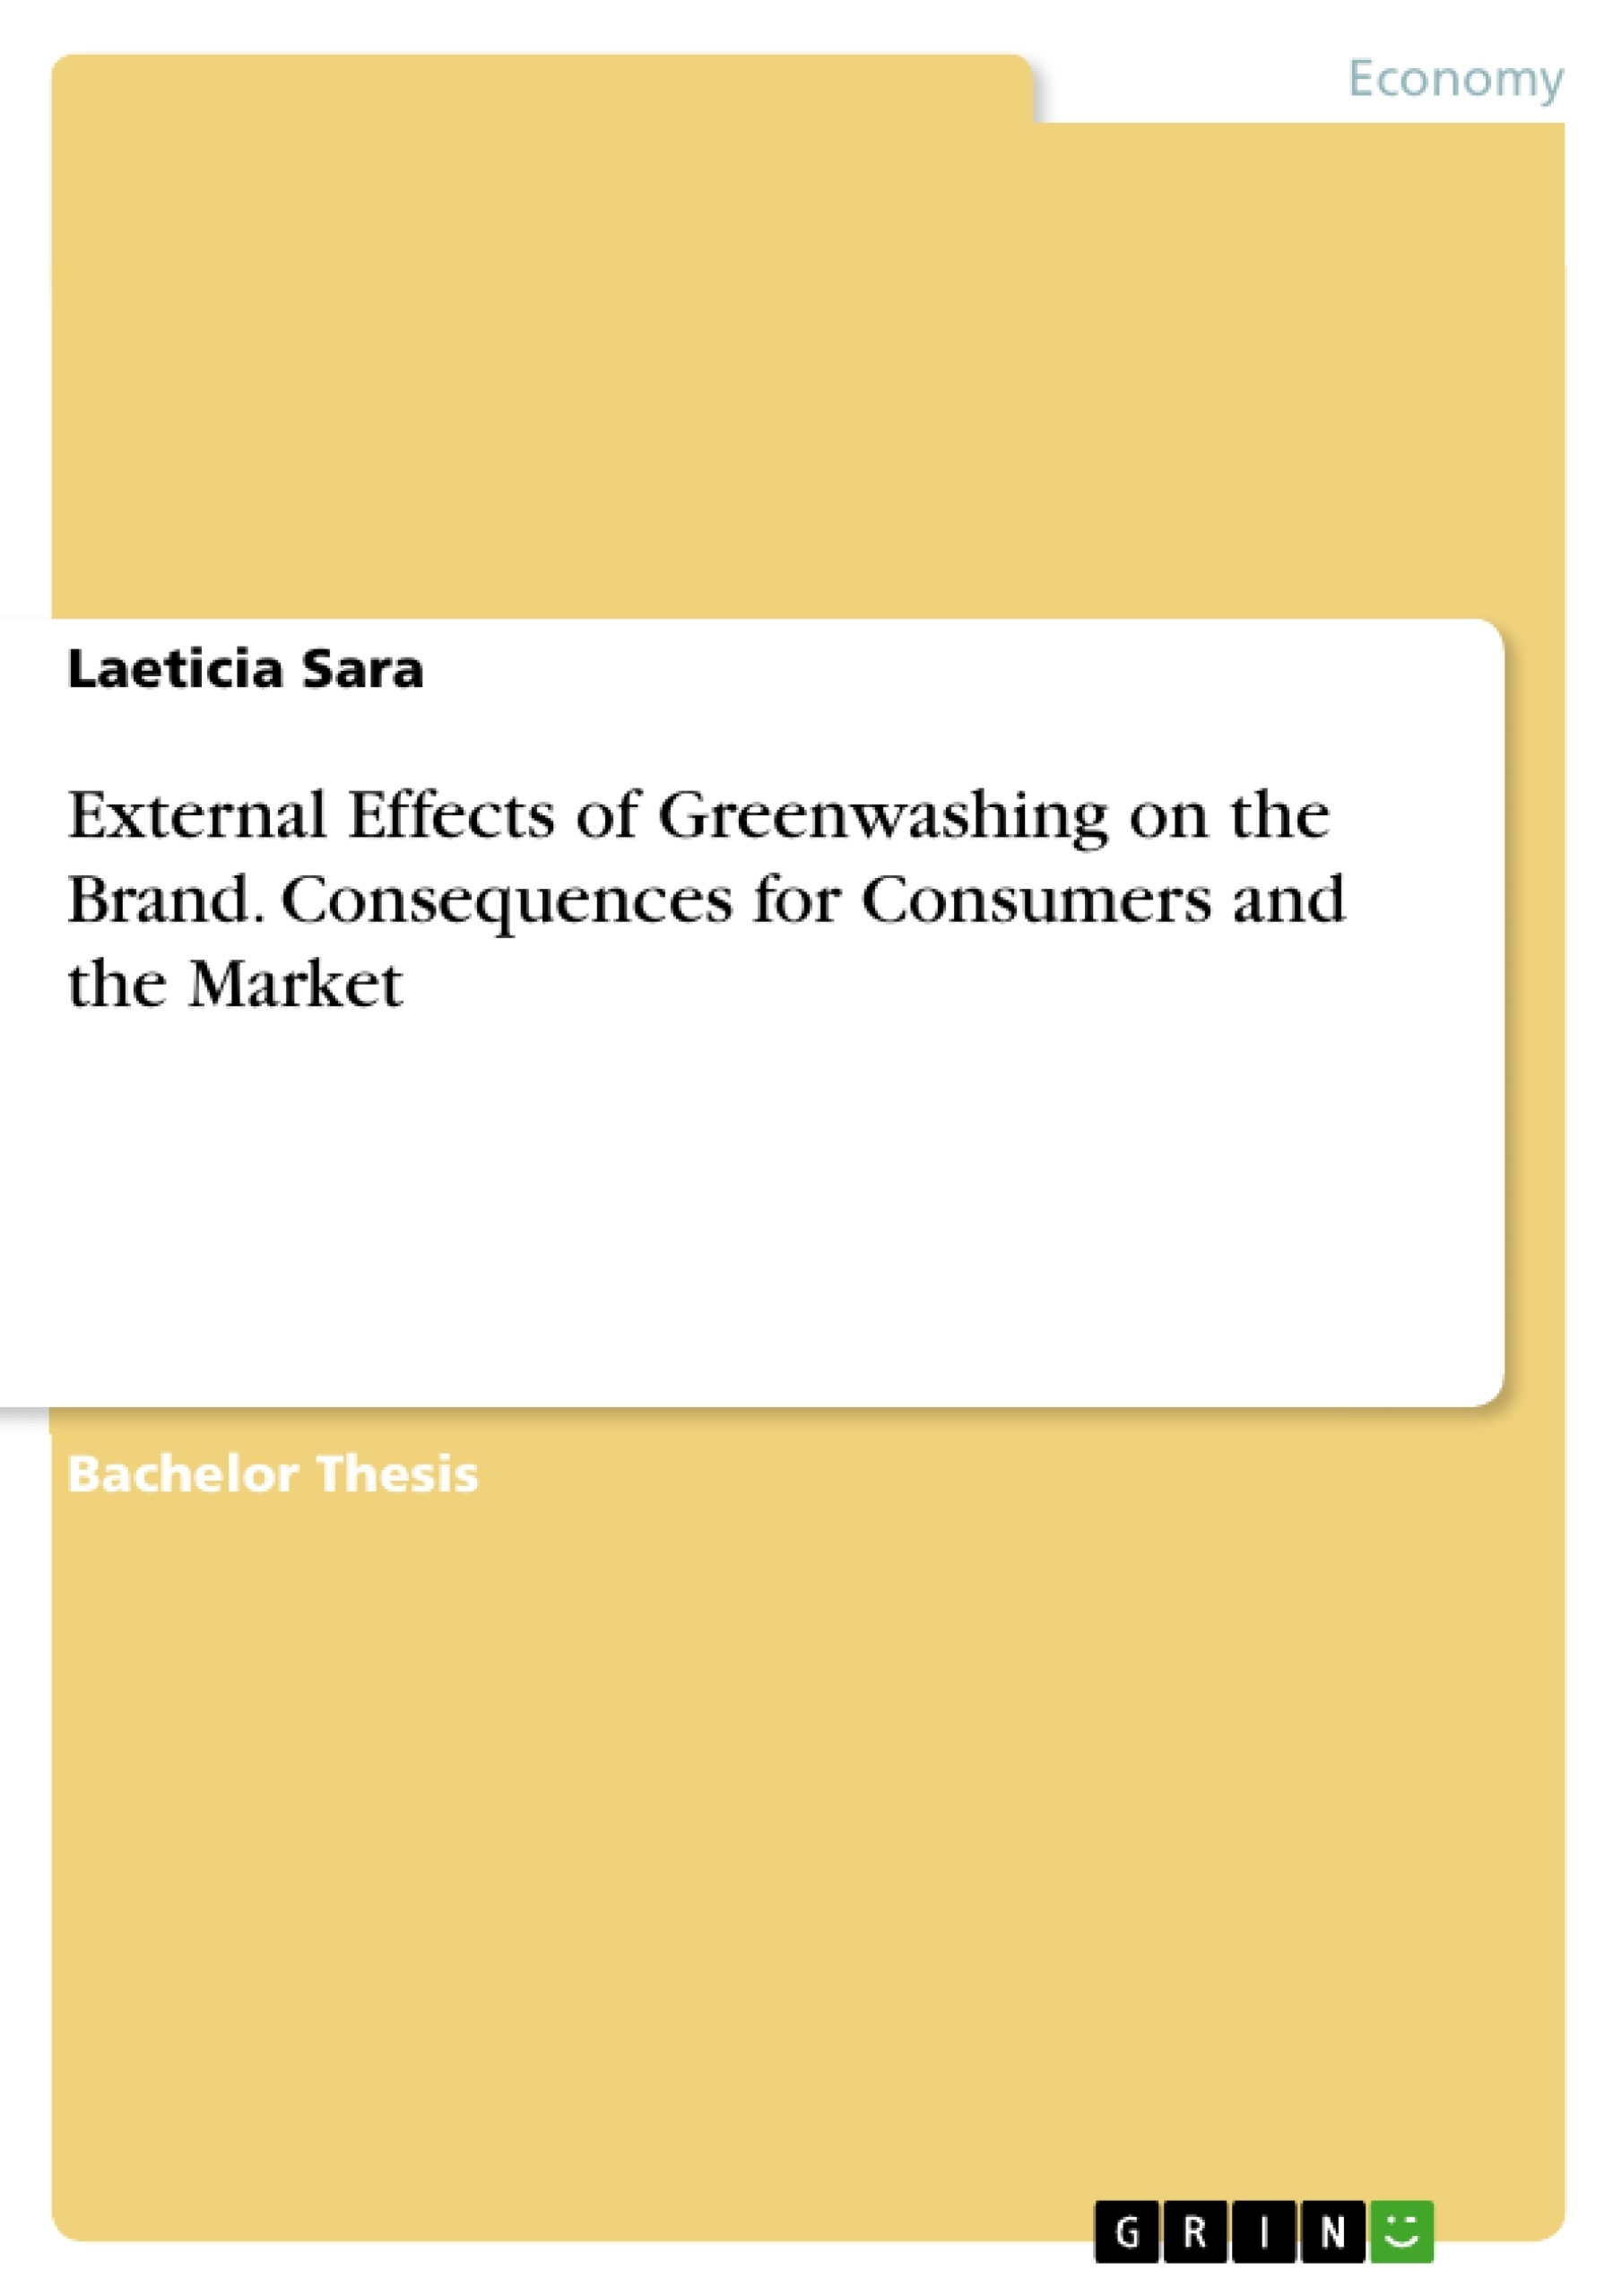 Title: External Effects of Greenwashing on the Brand. Consequences for Consumers and the Market